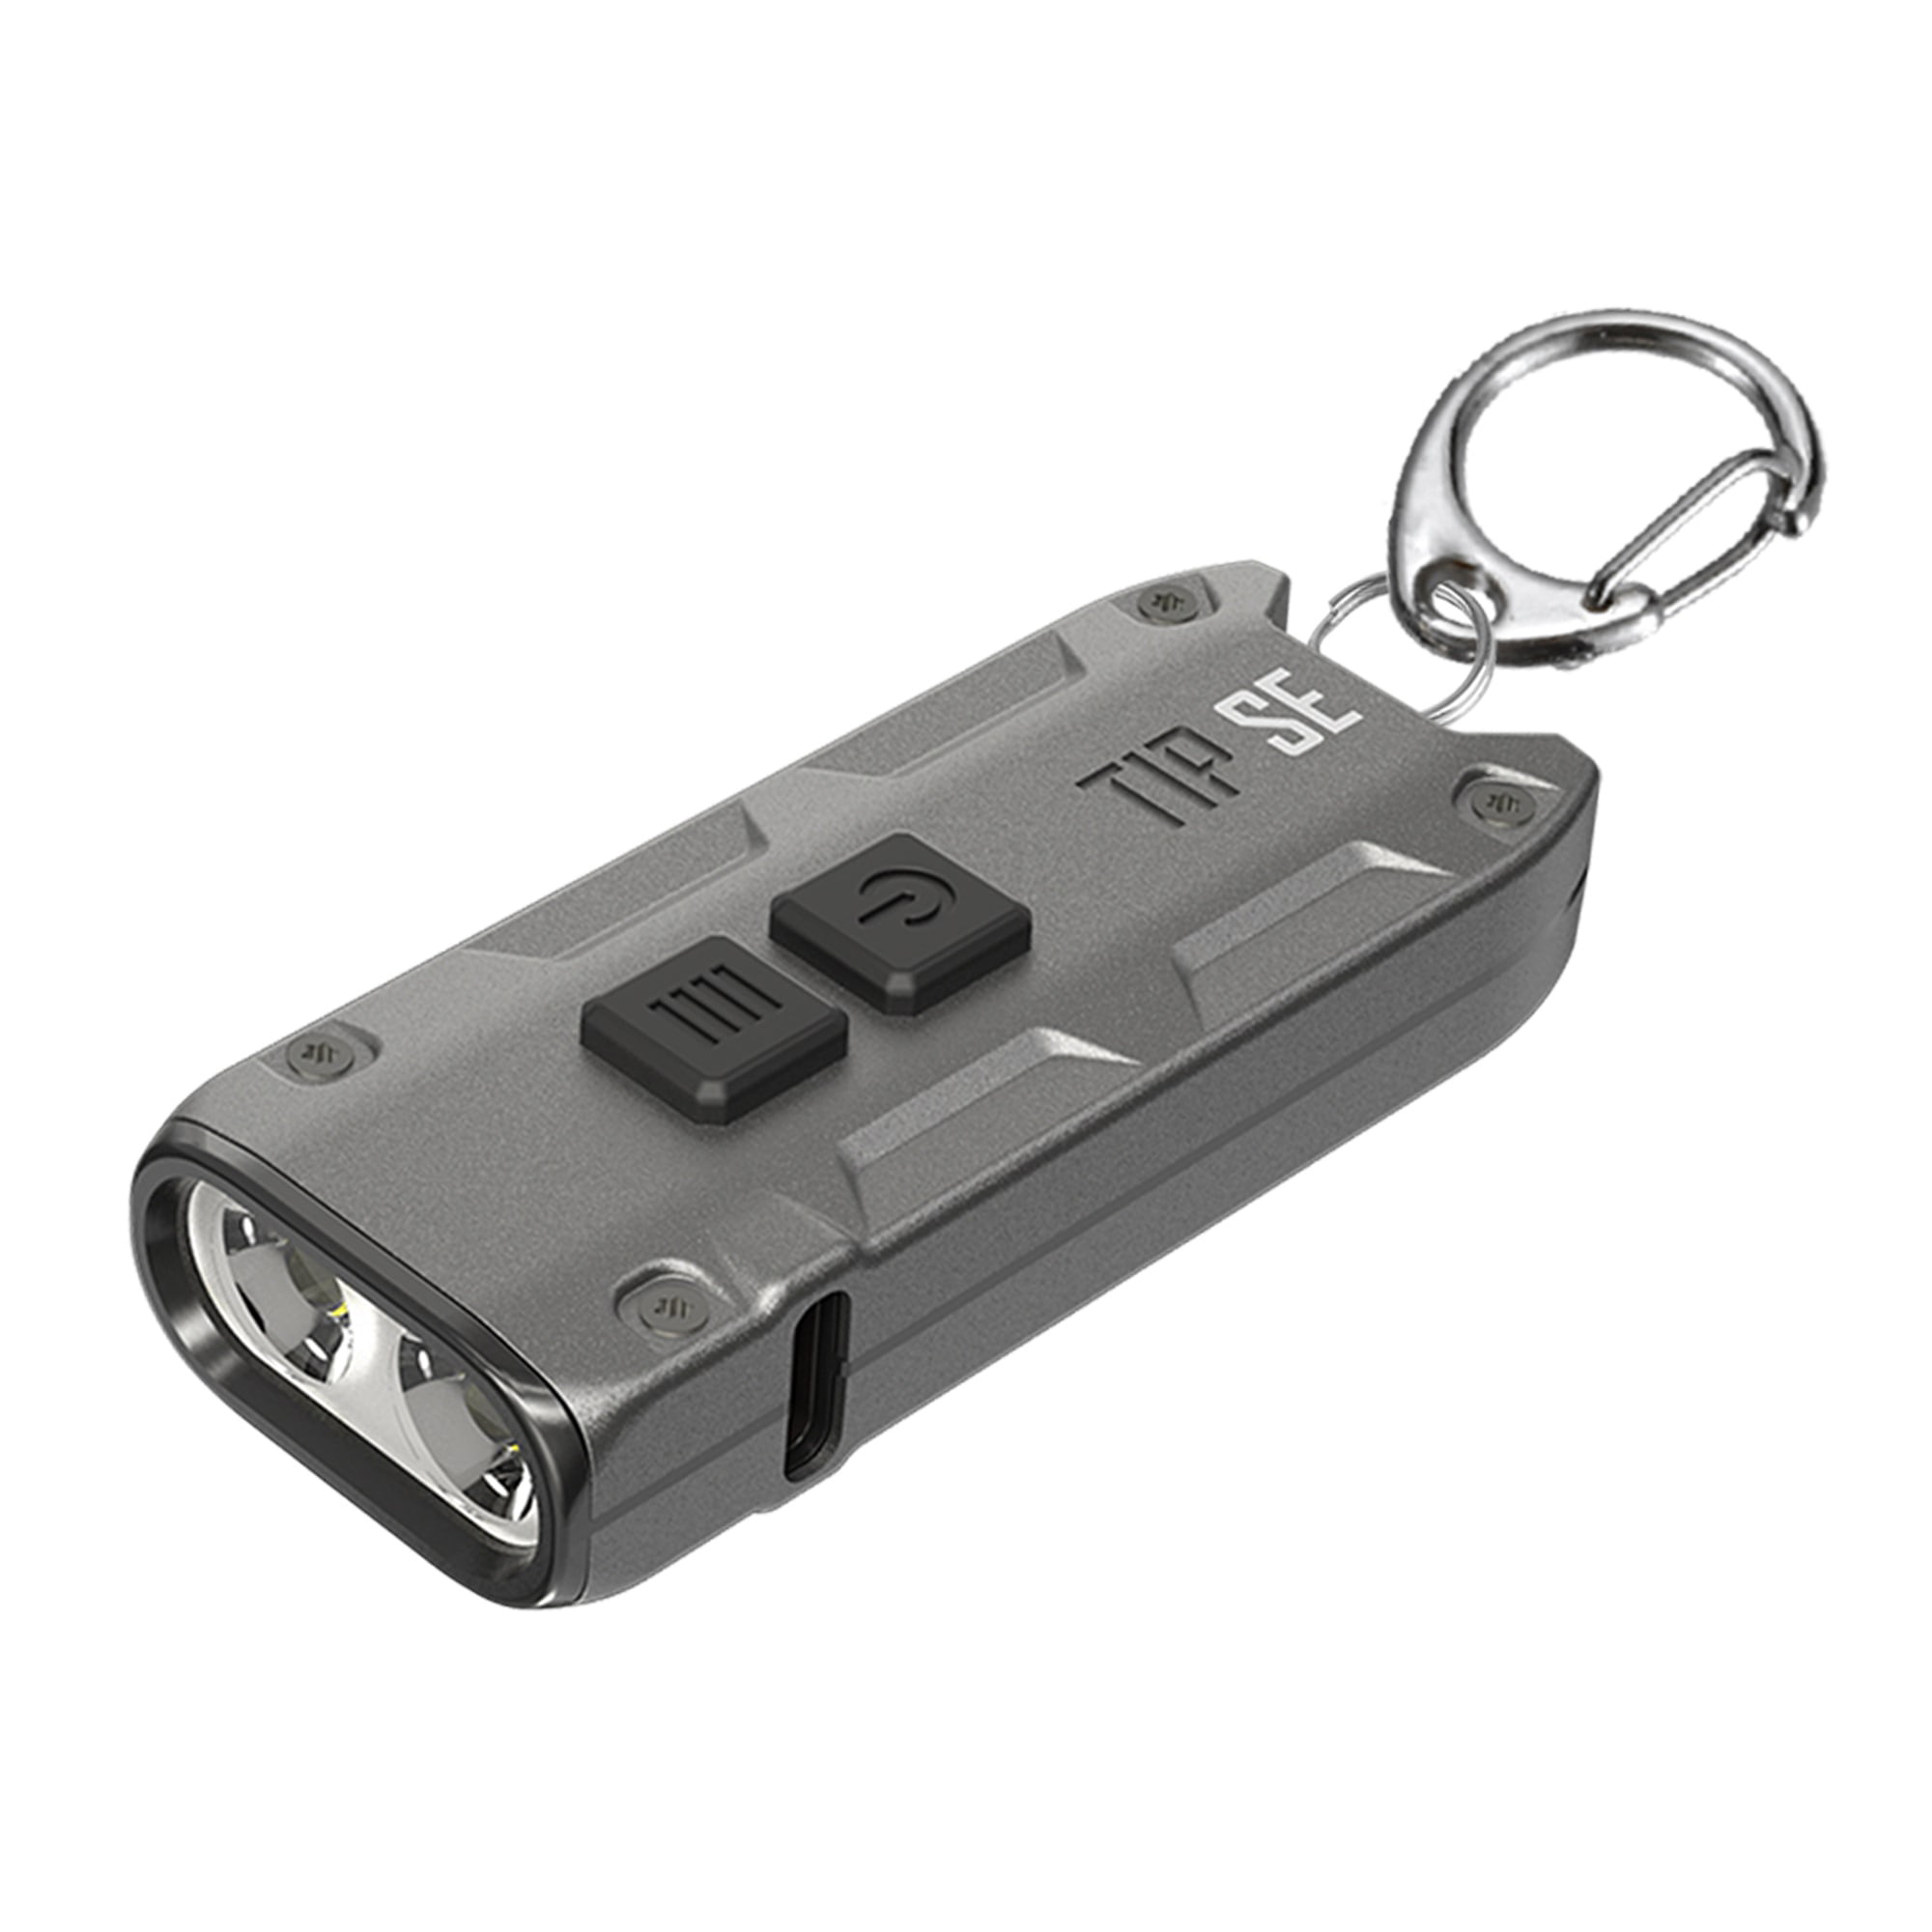 NITECORE TIP RECHARGEABLE KEYCHAIN LIGHT 360 LUMENS USB RECHARGEABLE